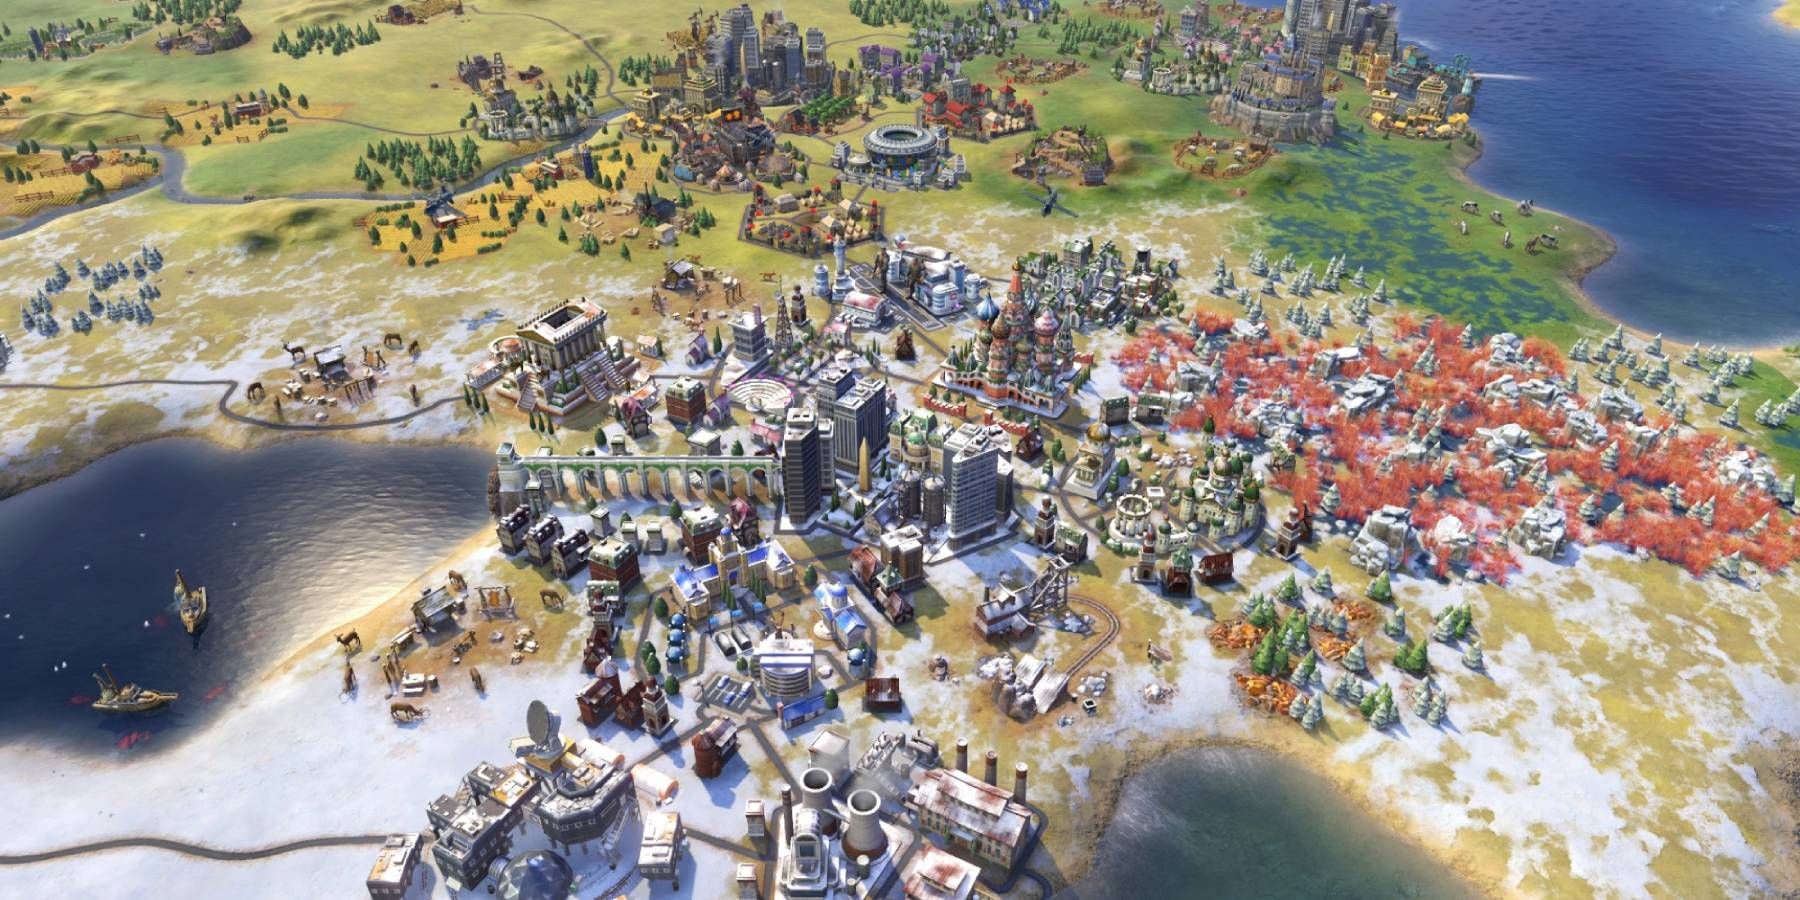 A large coastal city in the tundra in Civilization 6